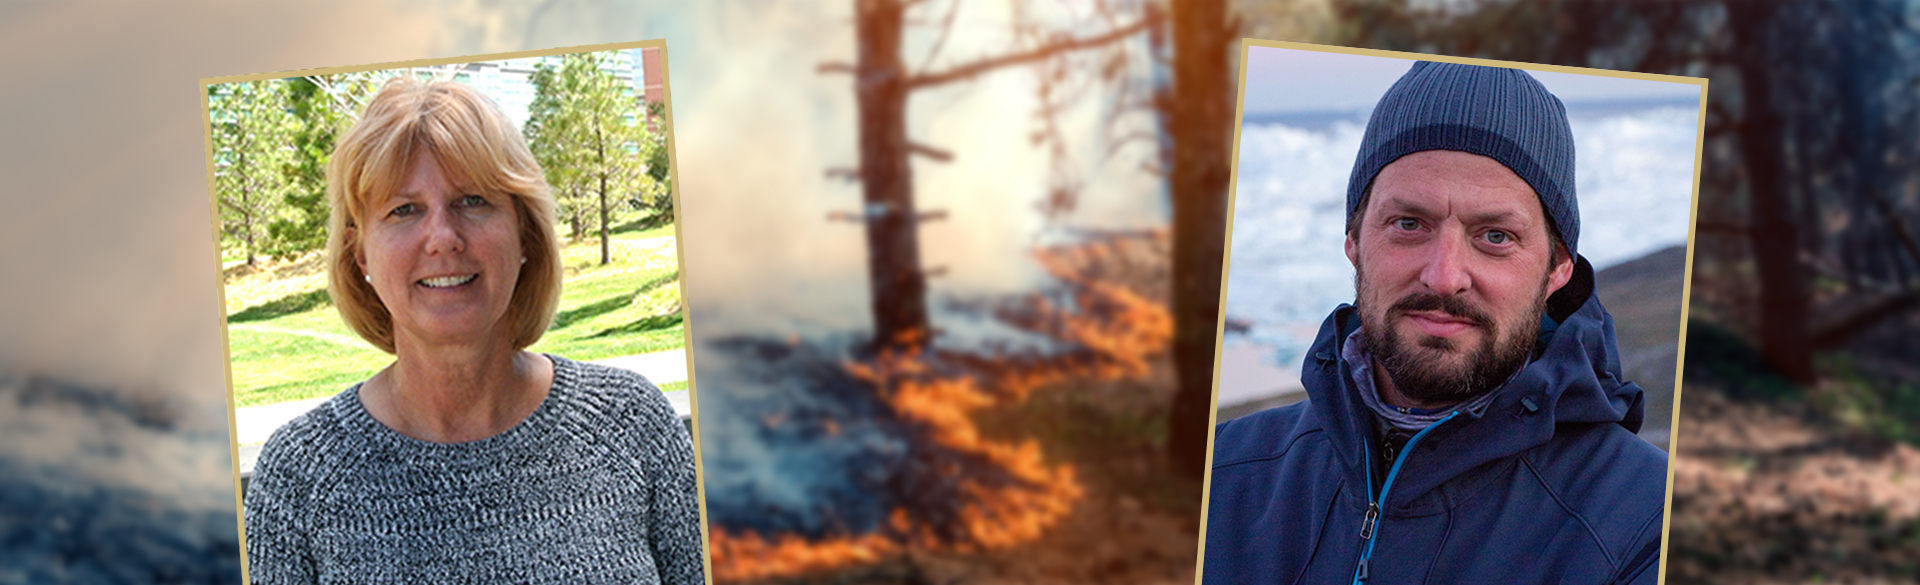 Rochford and Lemery headshots with forest fire background